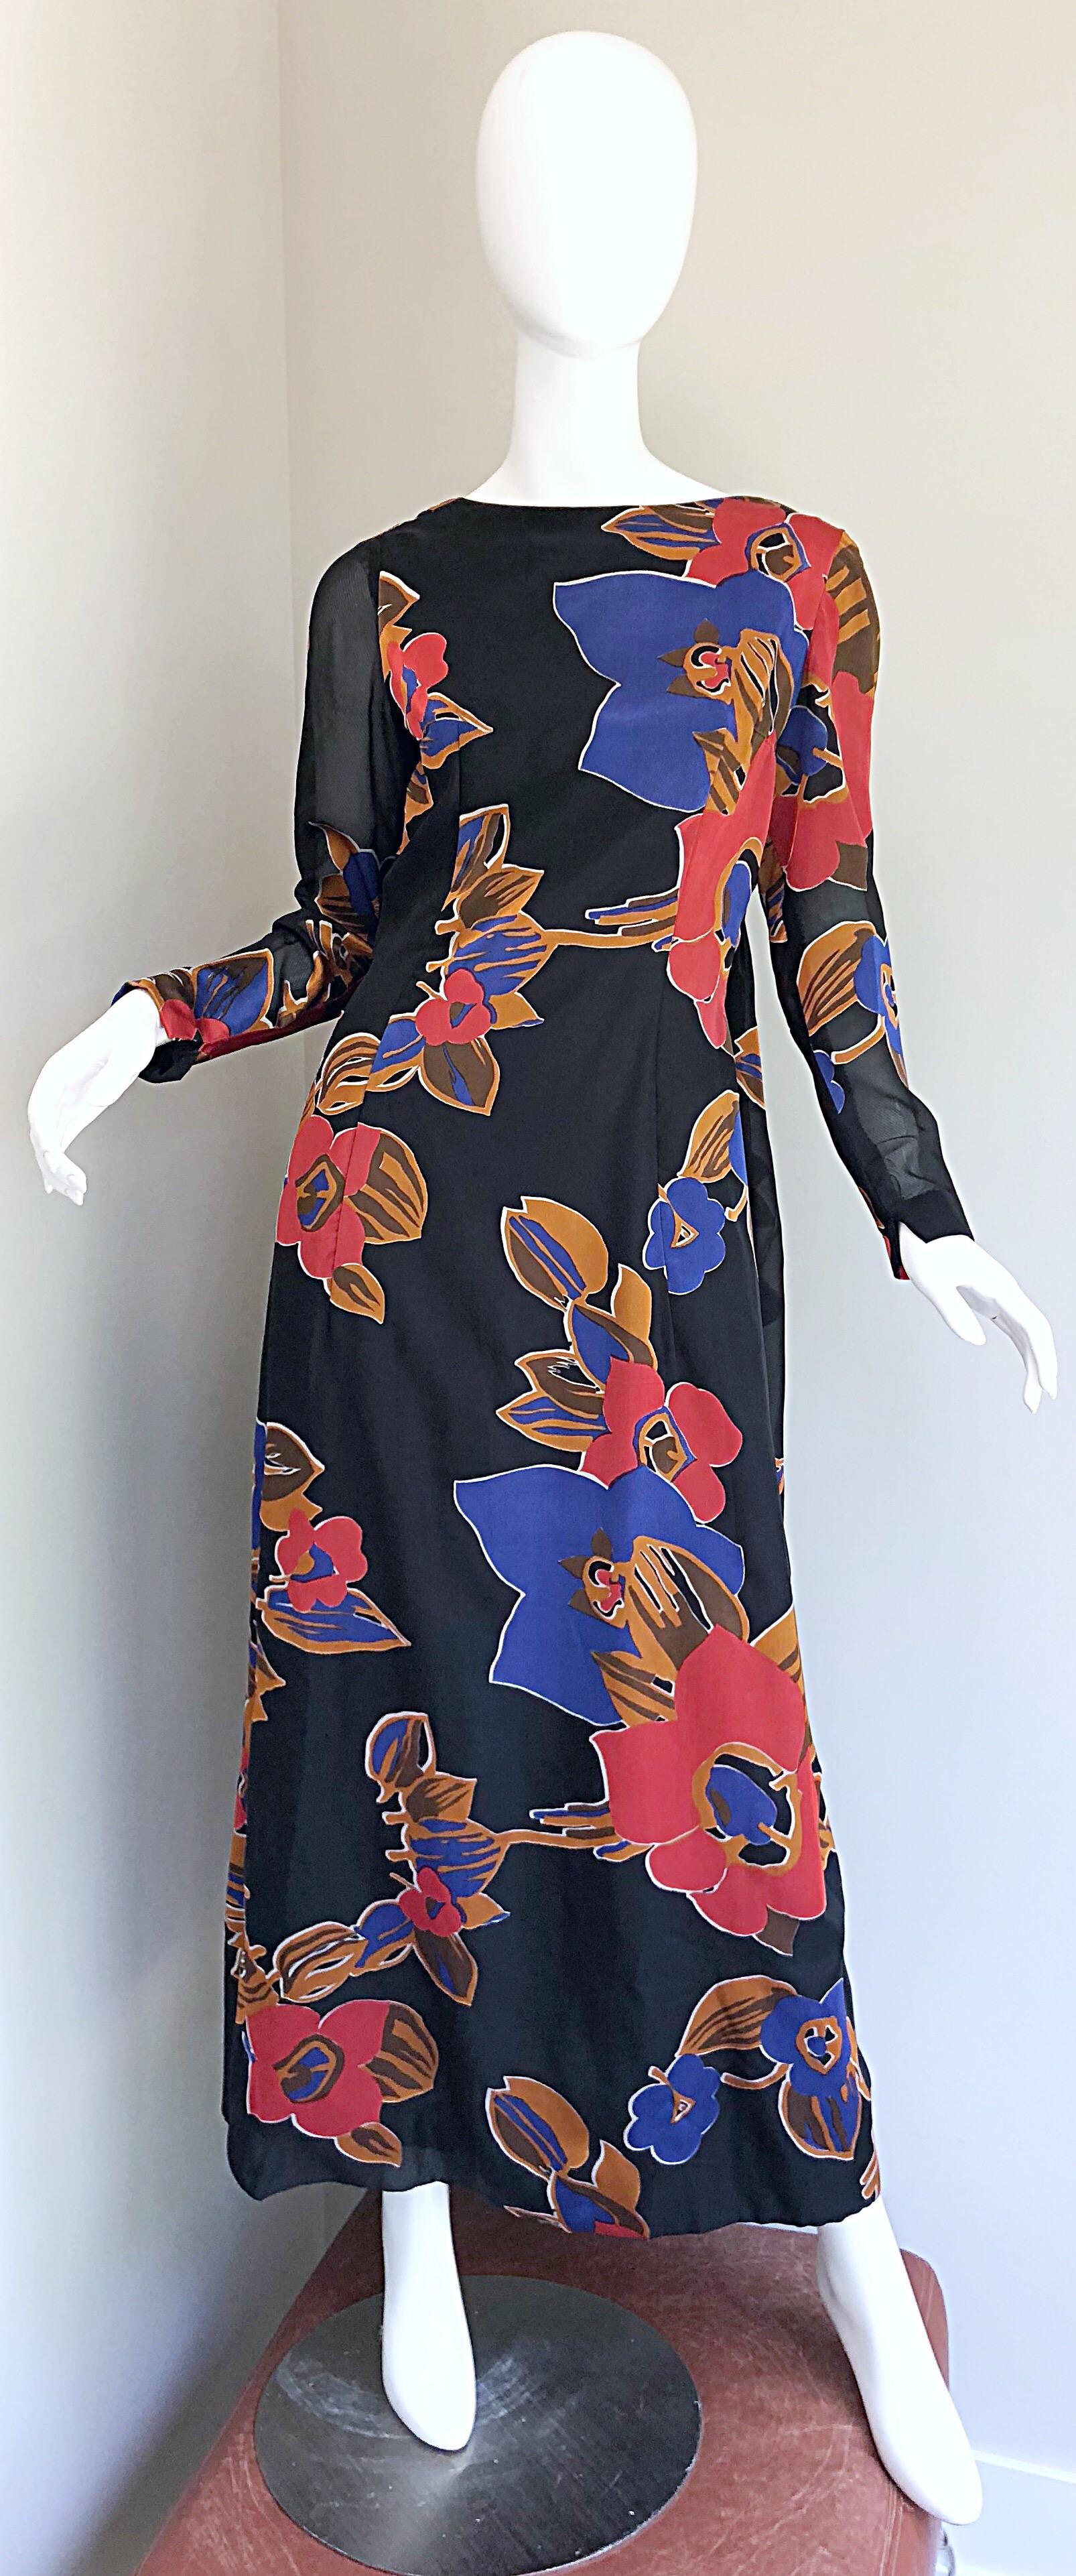 Fabulous 1960s JOHN BOYLE BISHOP black, red and terra cotta brown silk trained gown! Features an elegant high neck with a dramatic cape-like train in the back. Semi sheer patterned sleeves. Full metal zipper up the back with hook-and-eye closure.